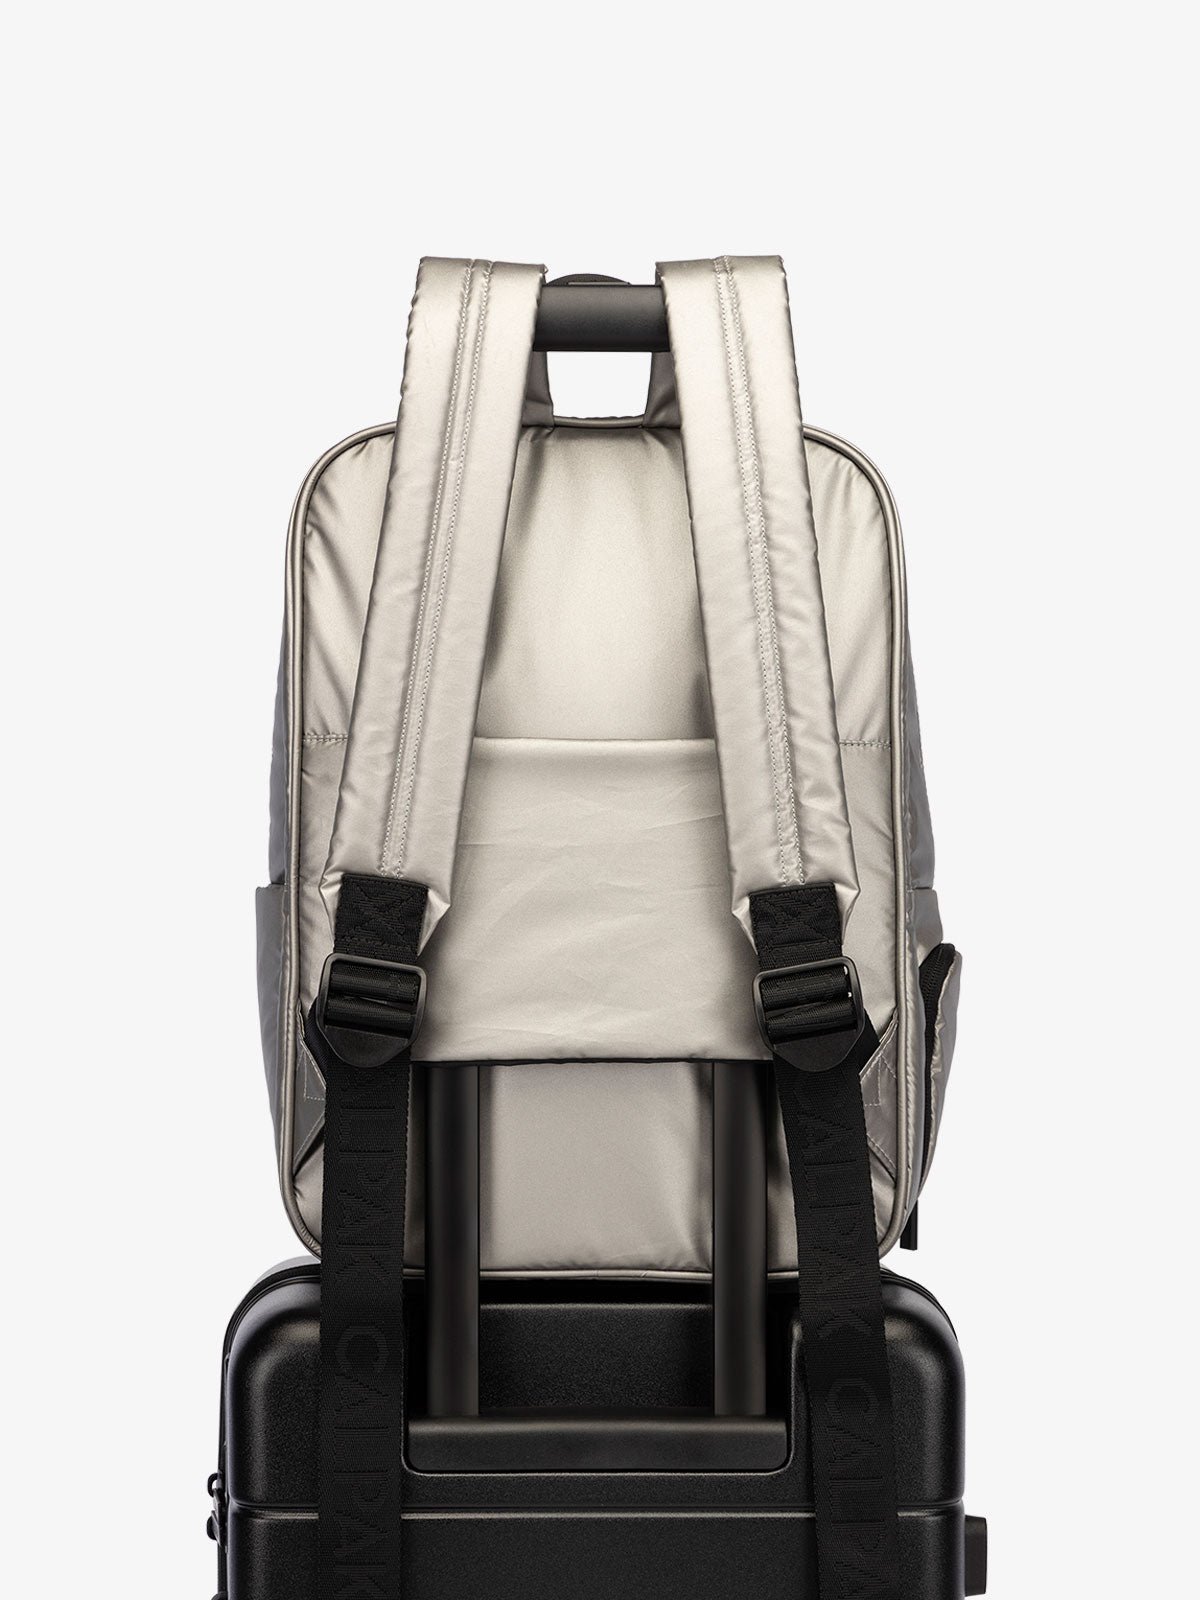 CALPAK water resistant Luka Laptop Backpack with adjustable shoulder straps and trolley sleeve in metallic silver